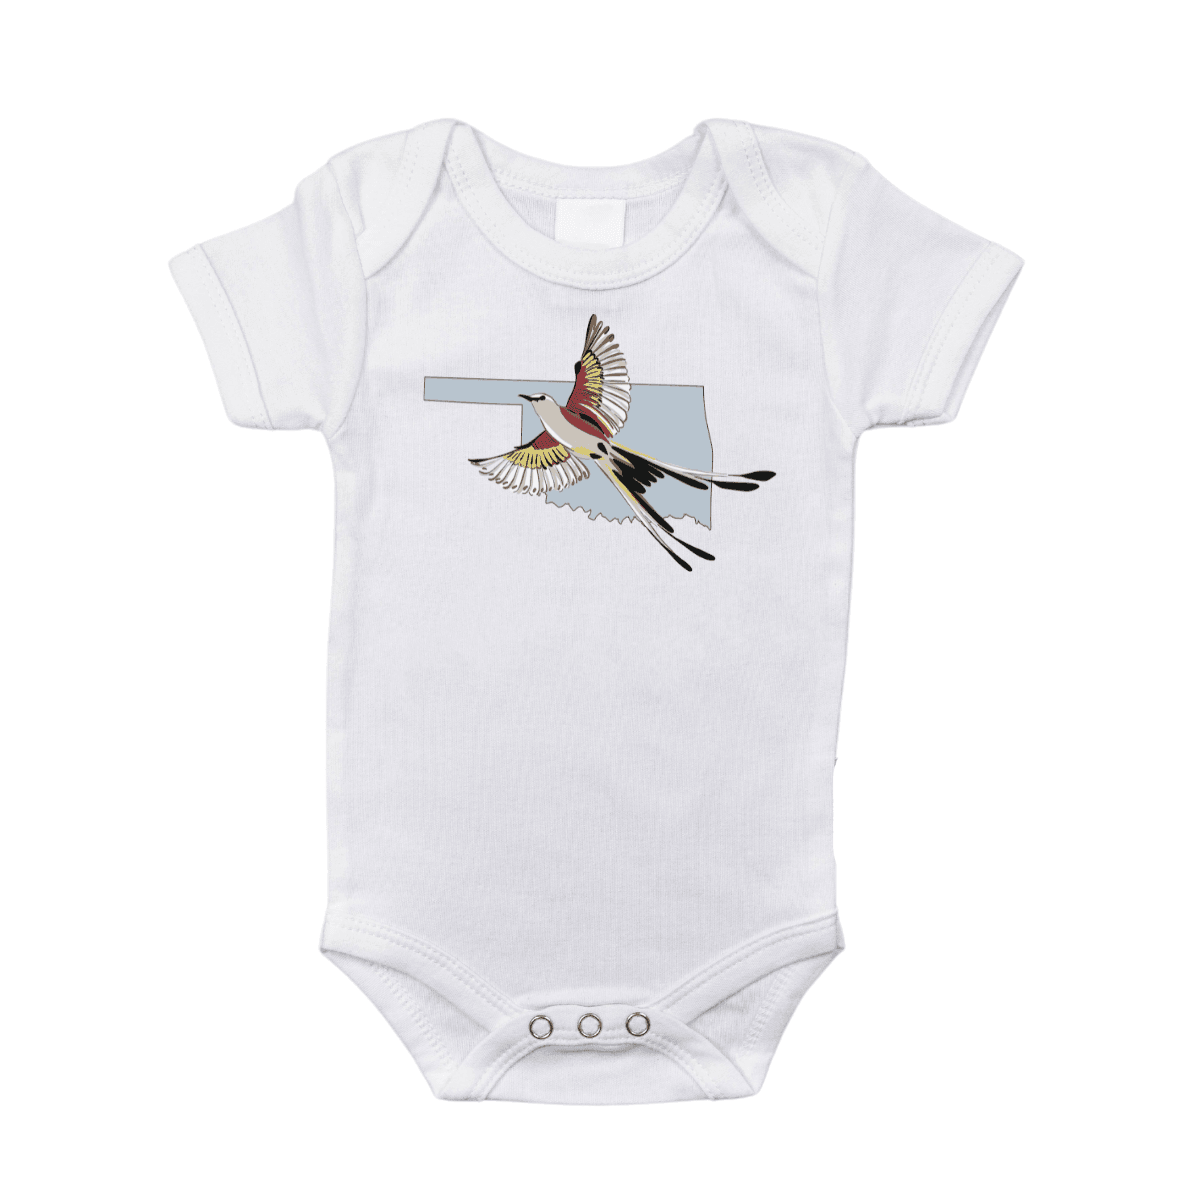 White baby onesie with "Oklahoma" and a scissortail bird graphic, featuring a heart and state outline.